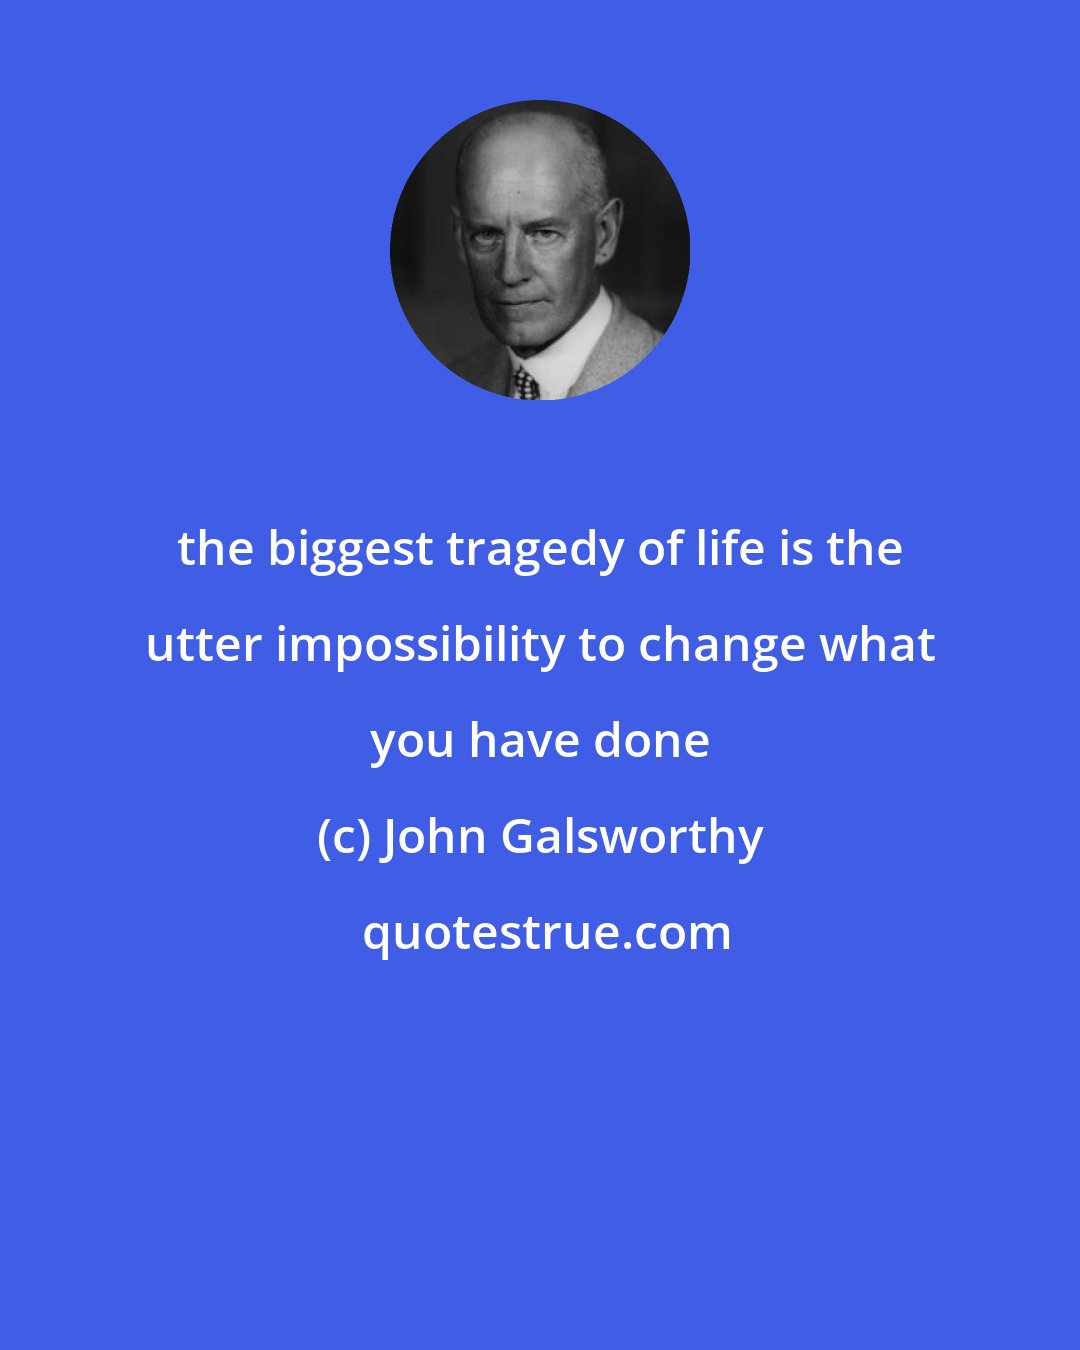 John Galsworthy: the biggest tragedy of life is the utter impossibility to change what you have done